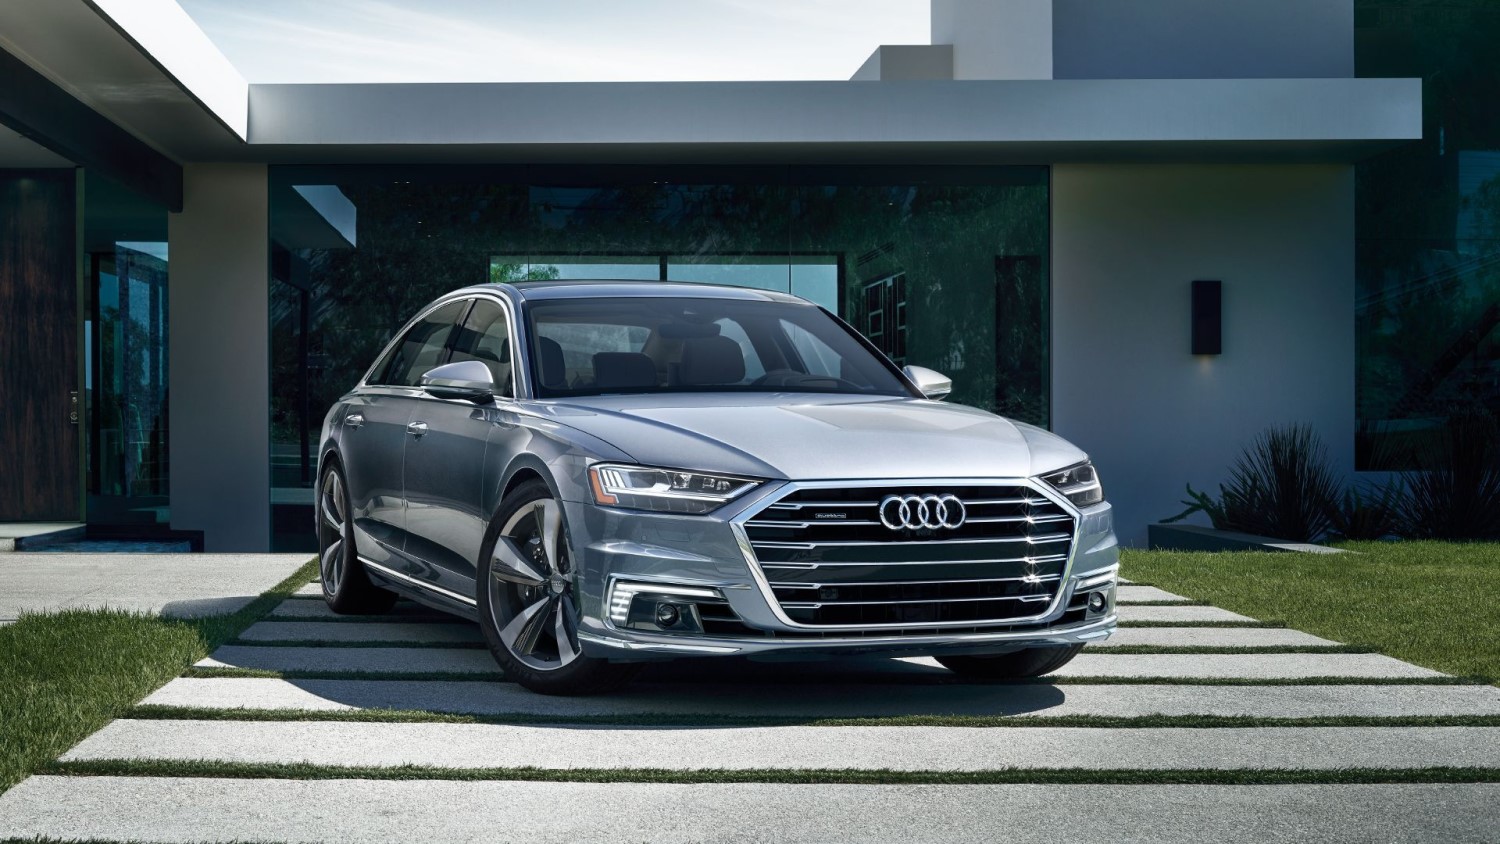 Audi A8s available in South Brunswick Township, NJ at Audi Princeton